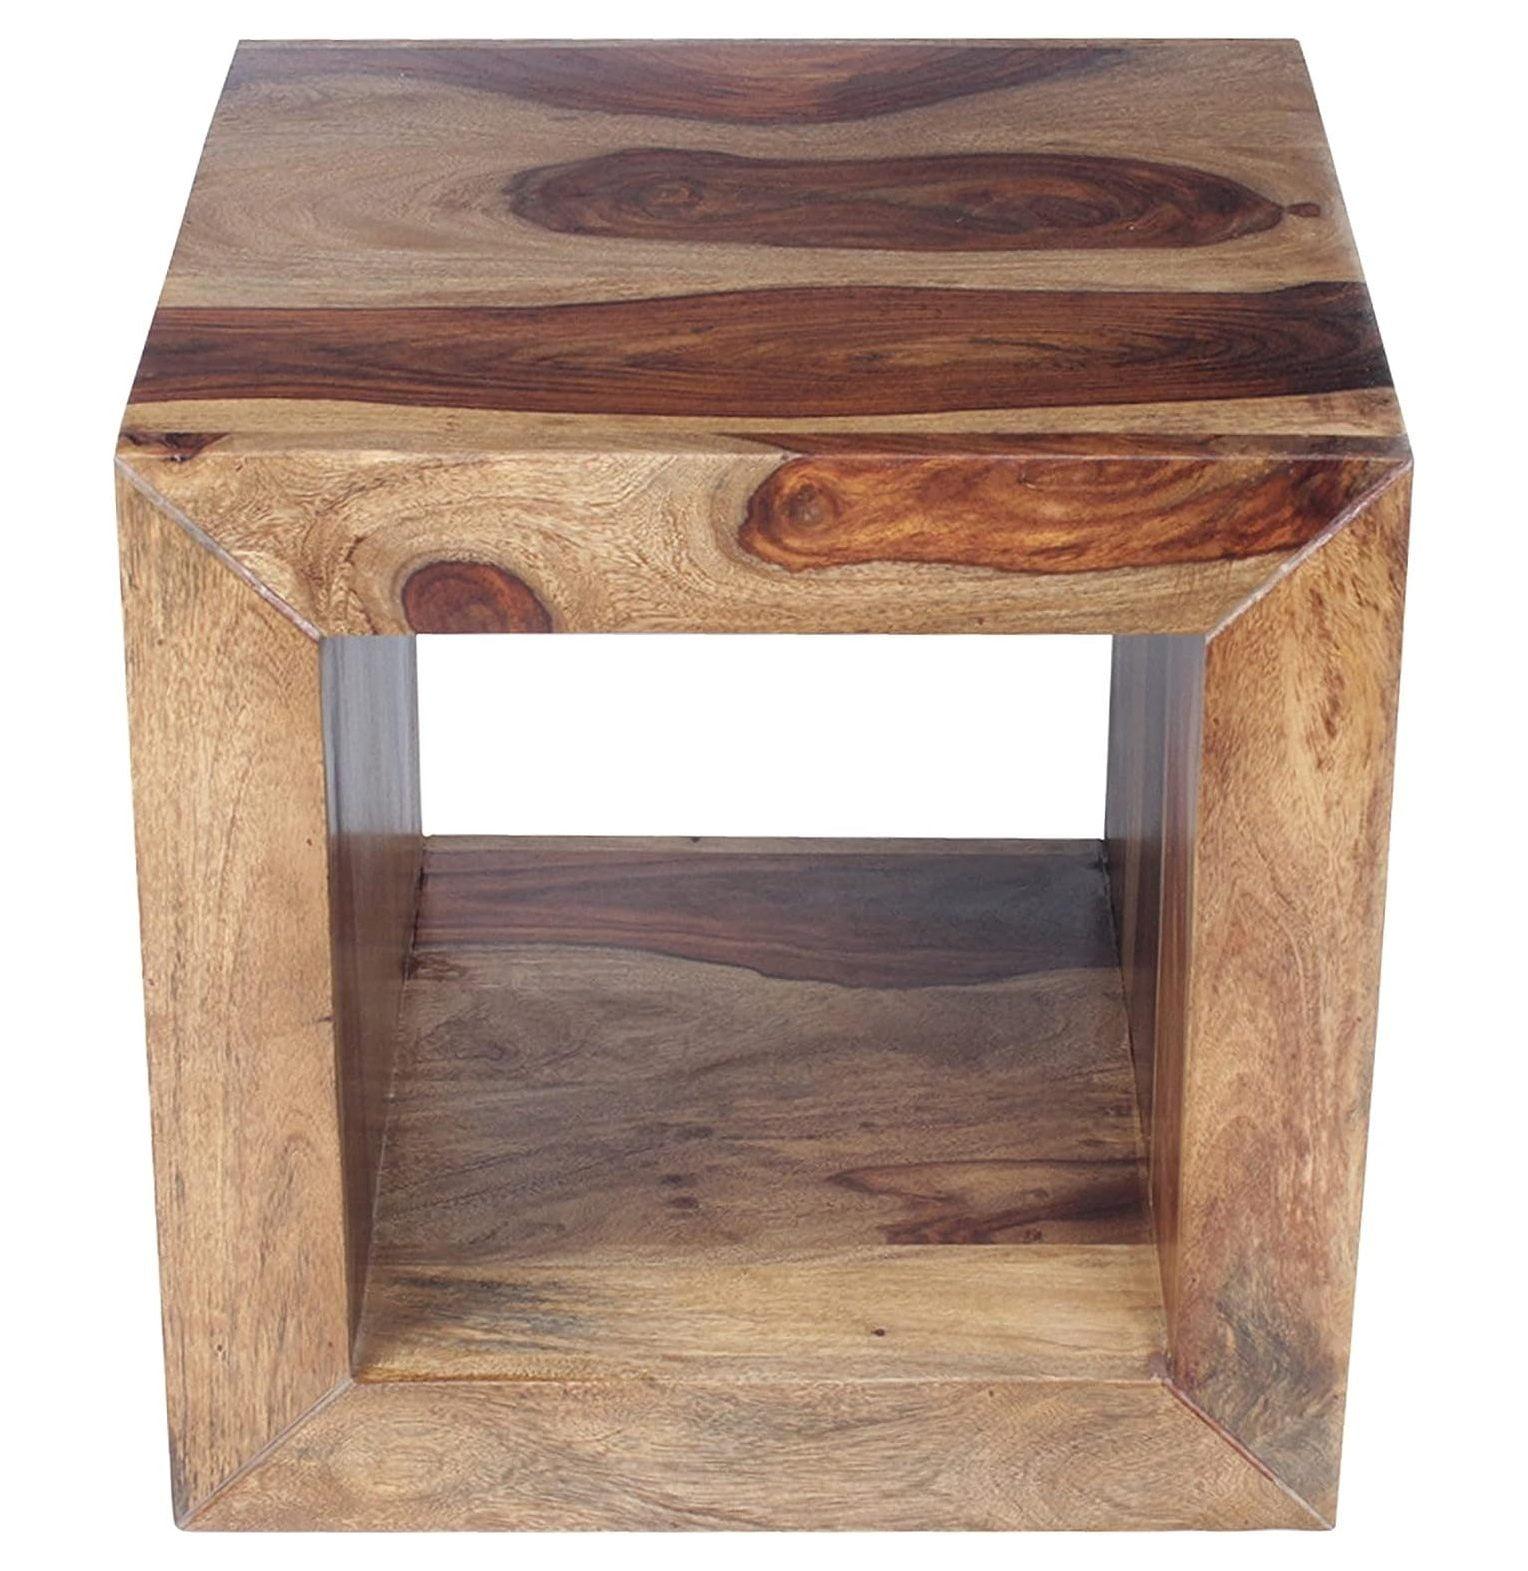 16" Brown Rosewood Cube Side Table with Cutout Bottom